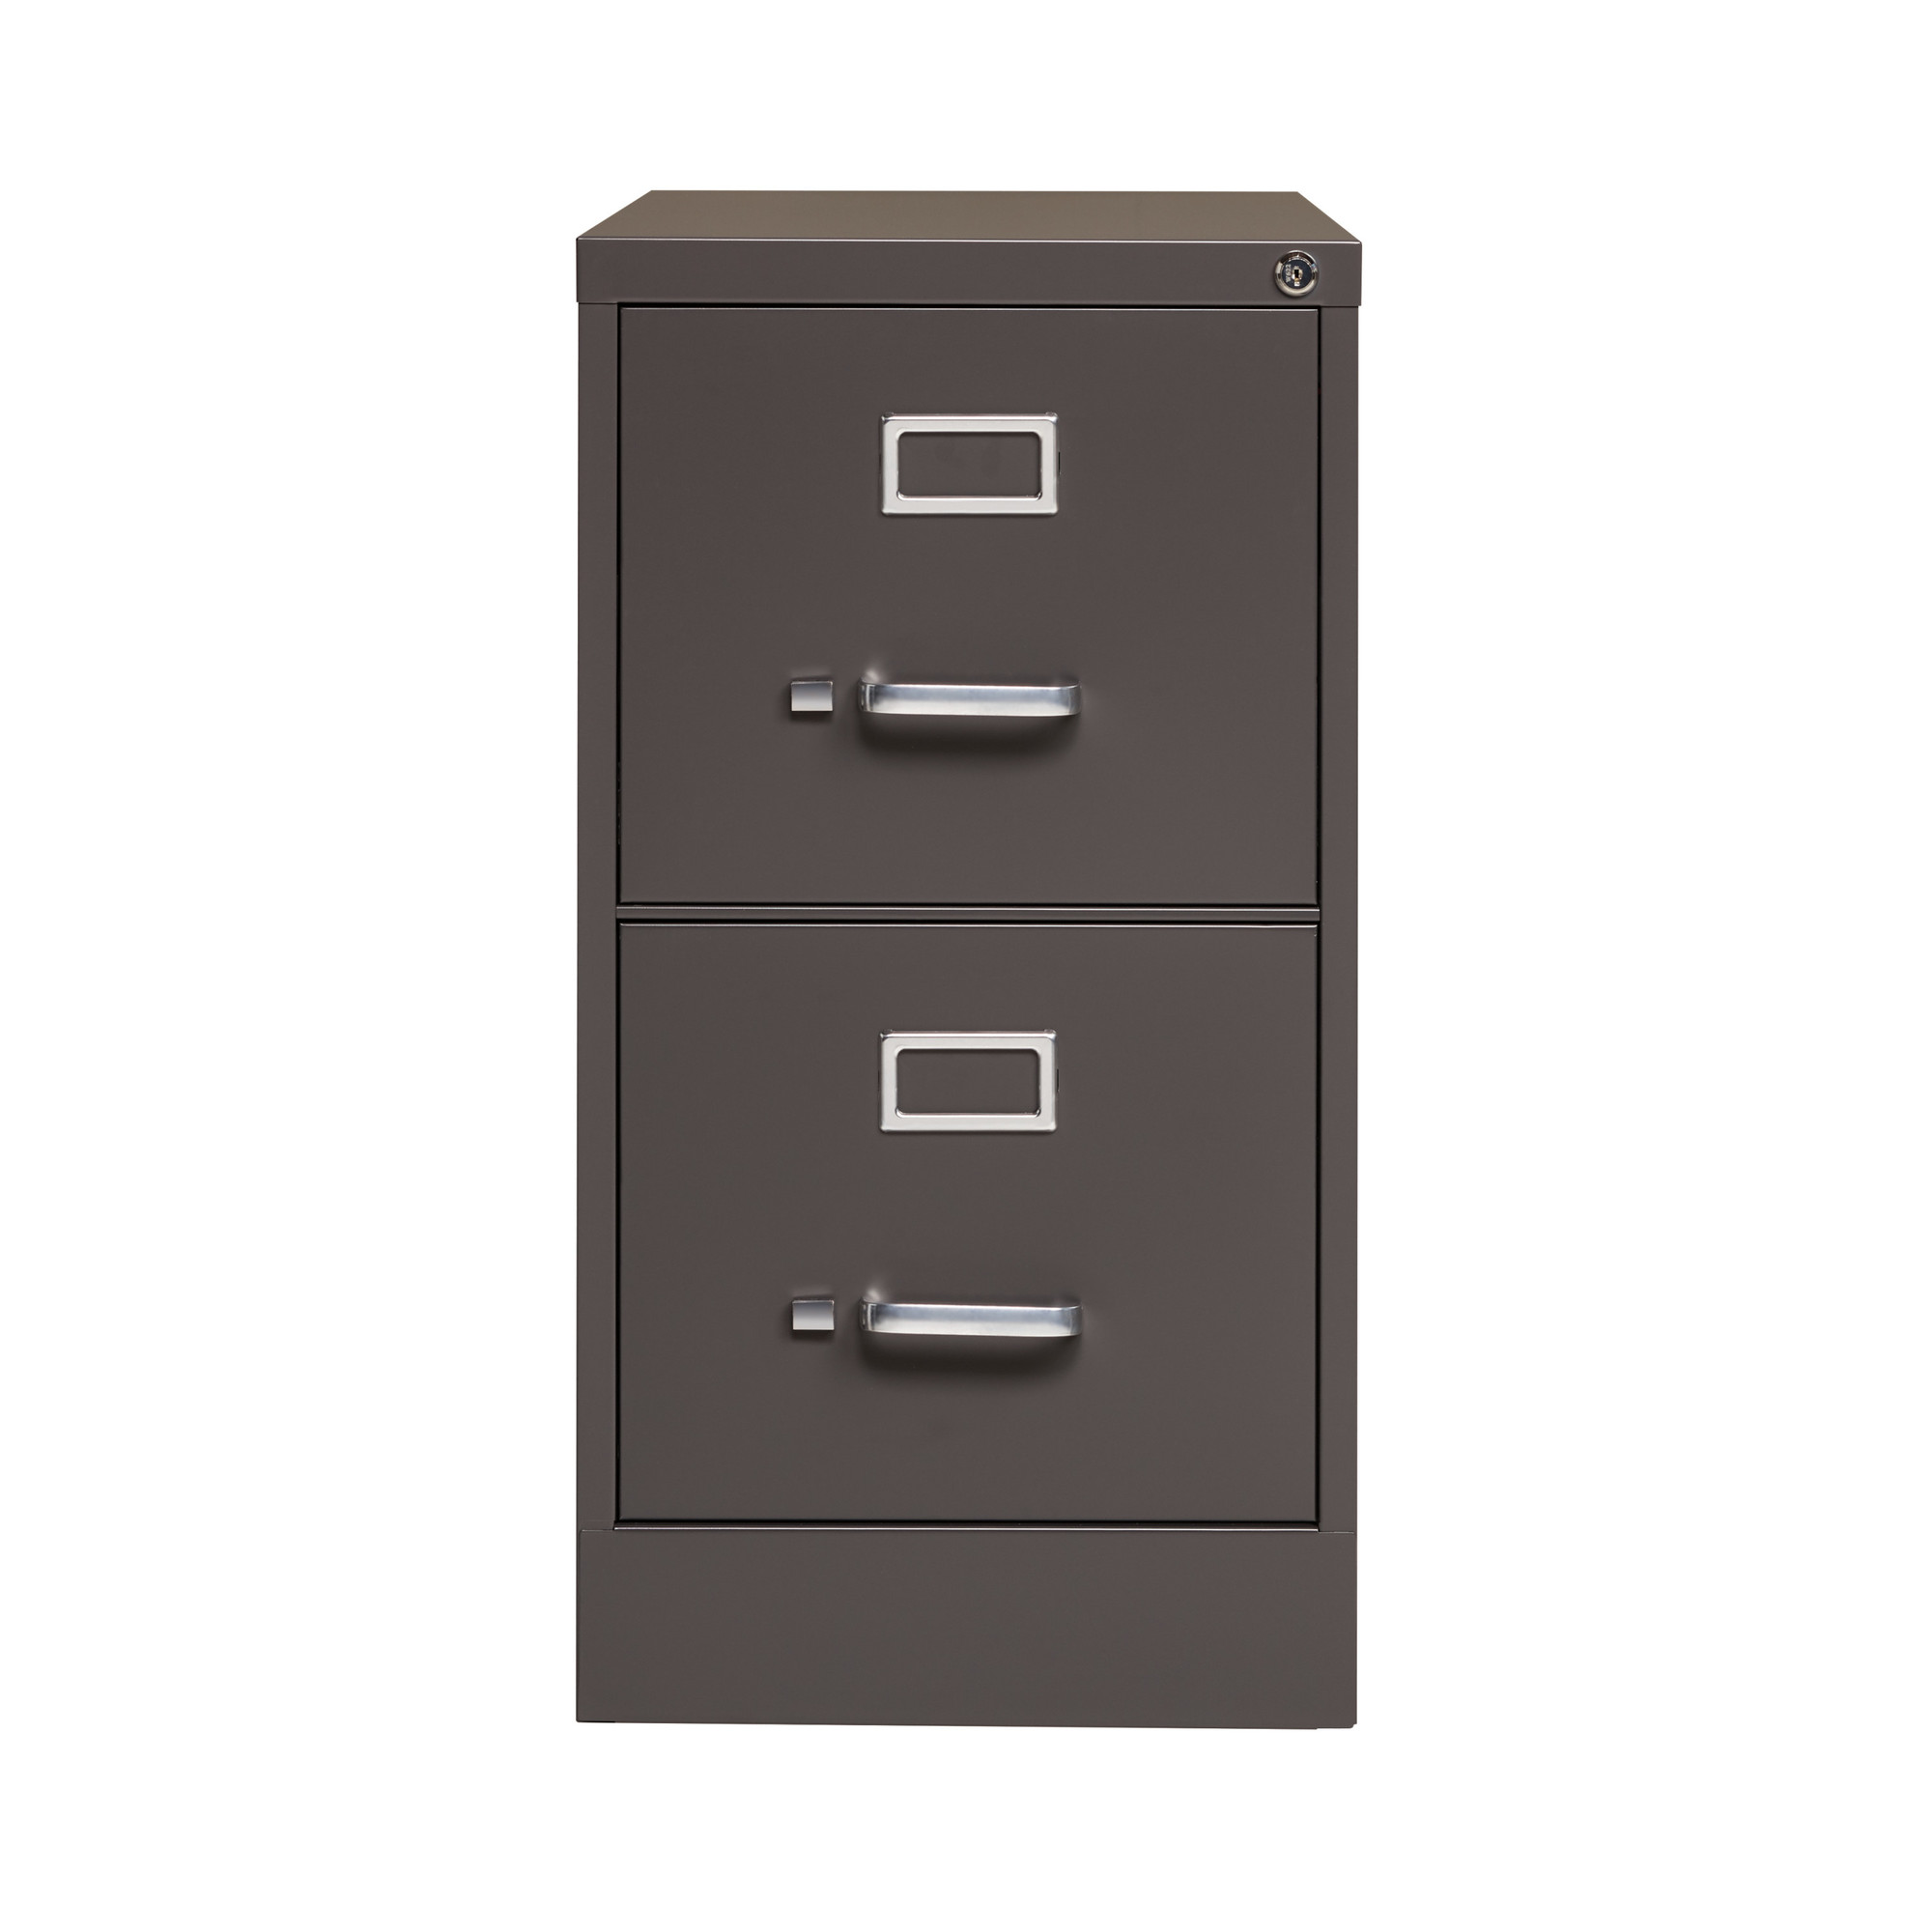 Hirsh Industries, 2 Drawer Letter W File Cabinet, Commercial Grade, Width 15 in, Depth 26.5 in, Height 28.375 in, Model 24064